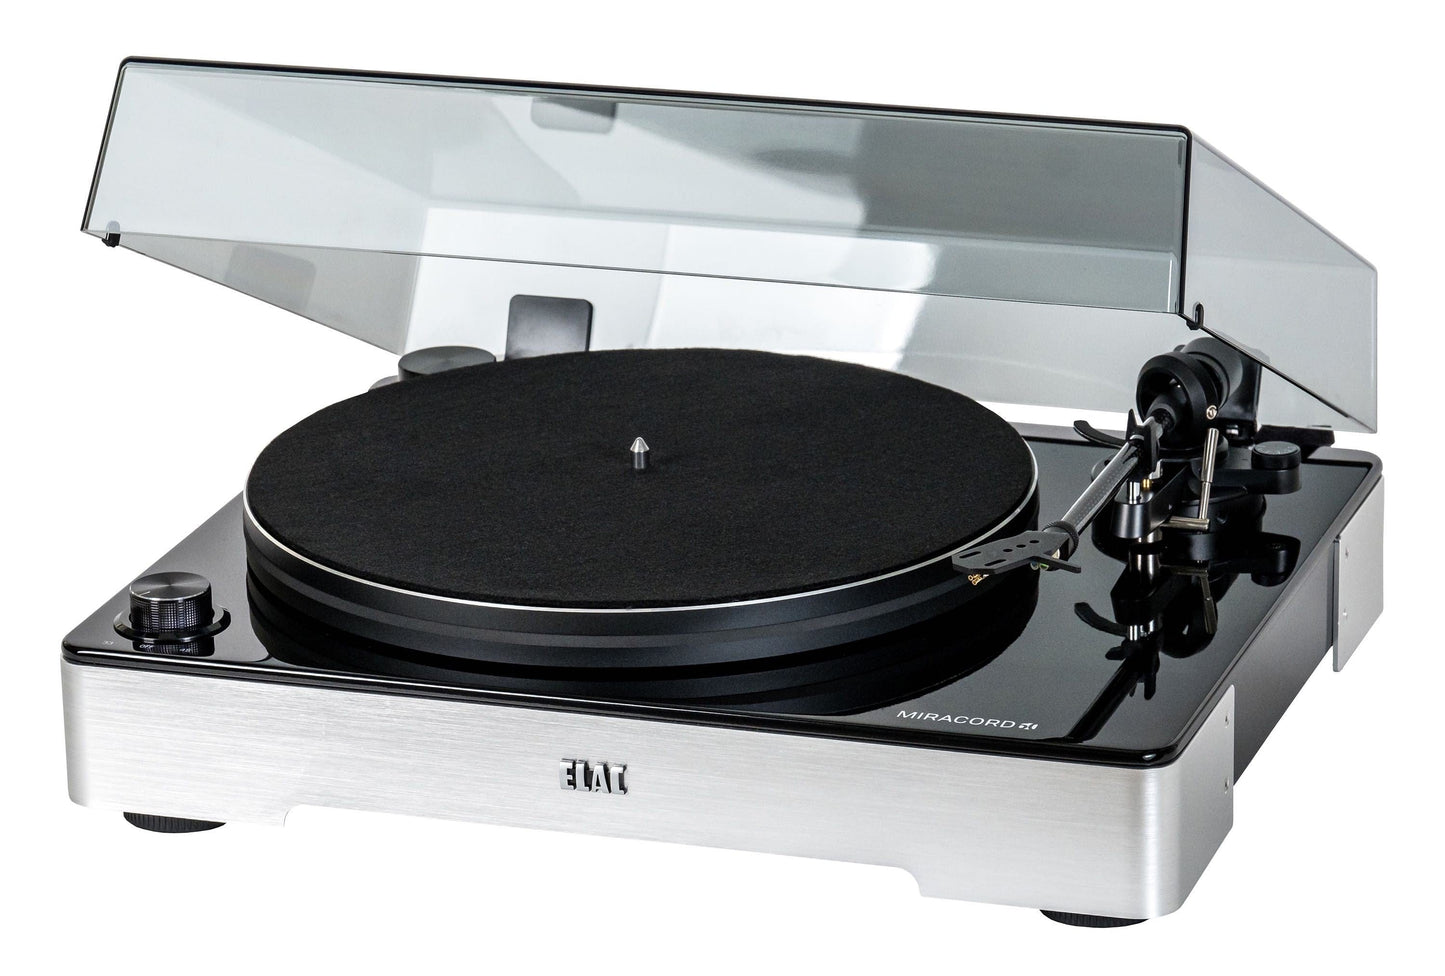 Elac Turntables Elac Miracord 60 Turntable in Silver